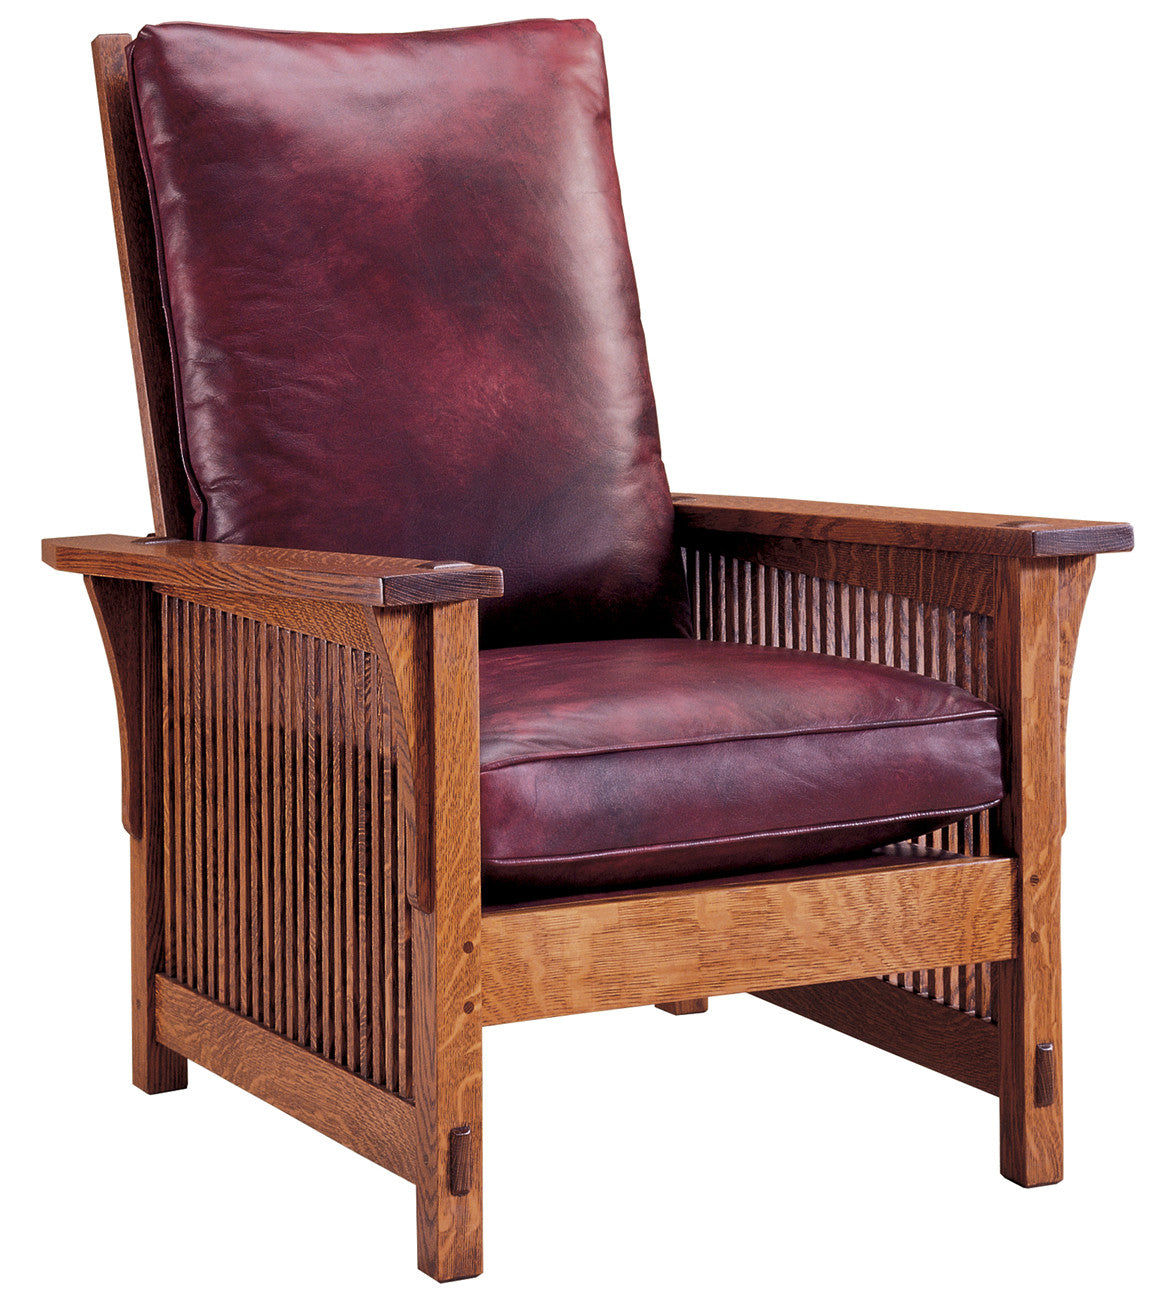 Stickley 367 Lc Compact Spindle Morris Chair With Loose Cushion